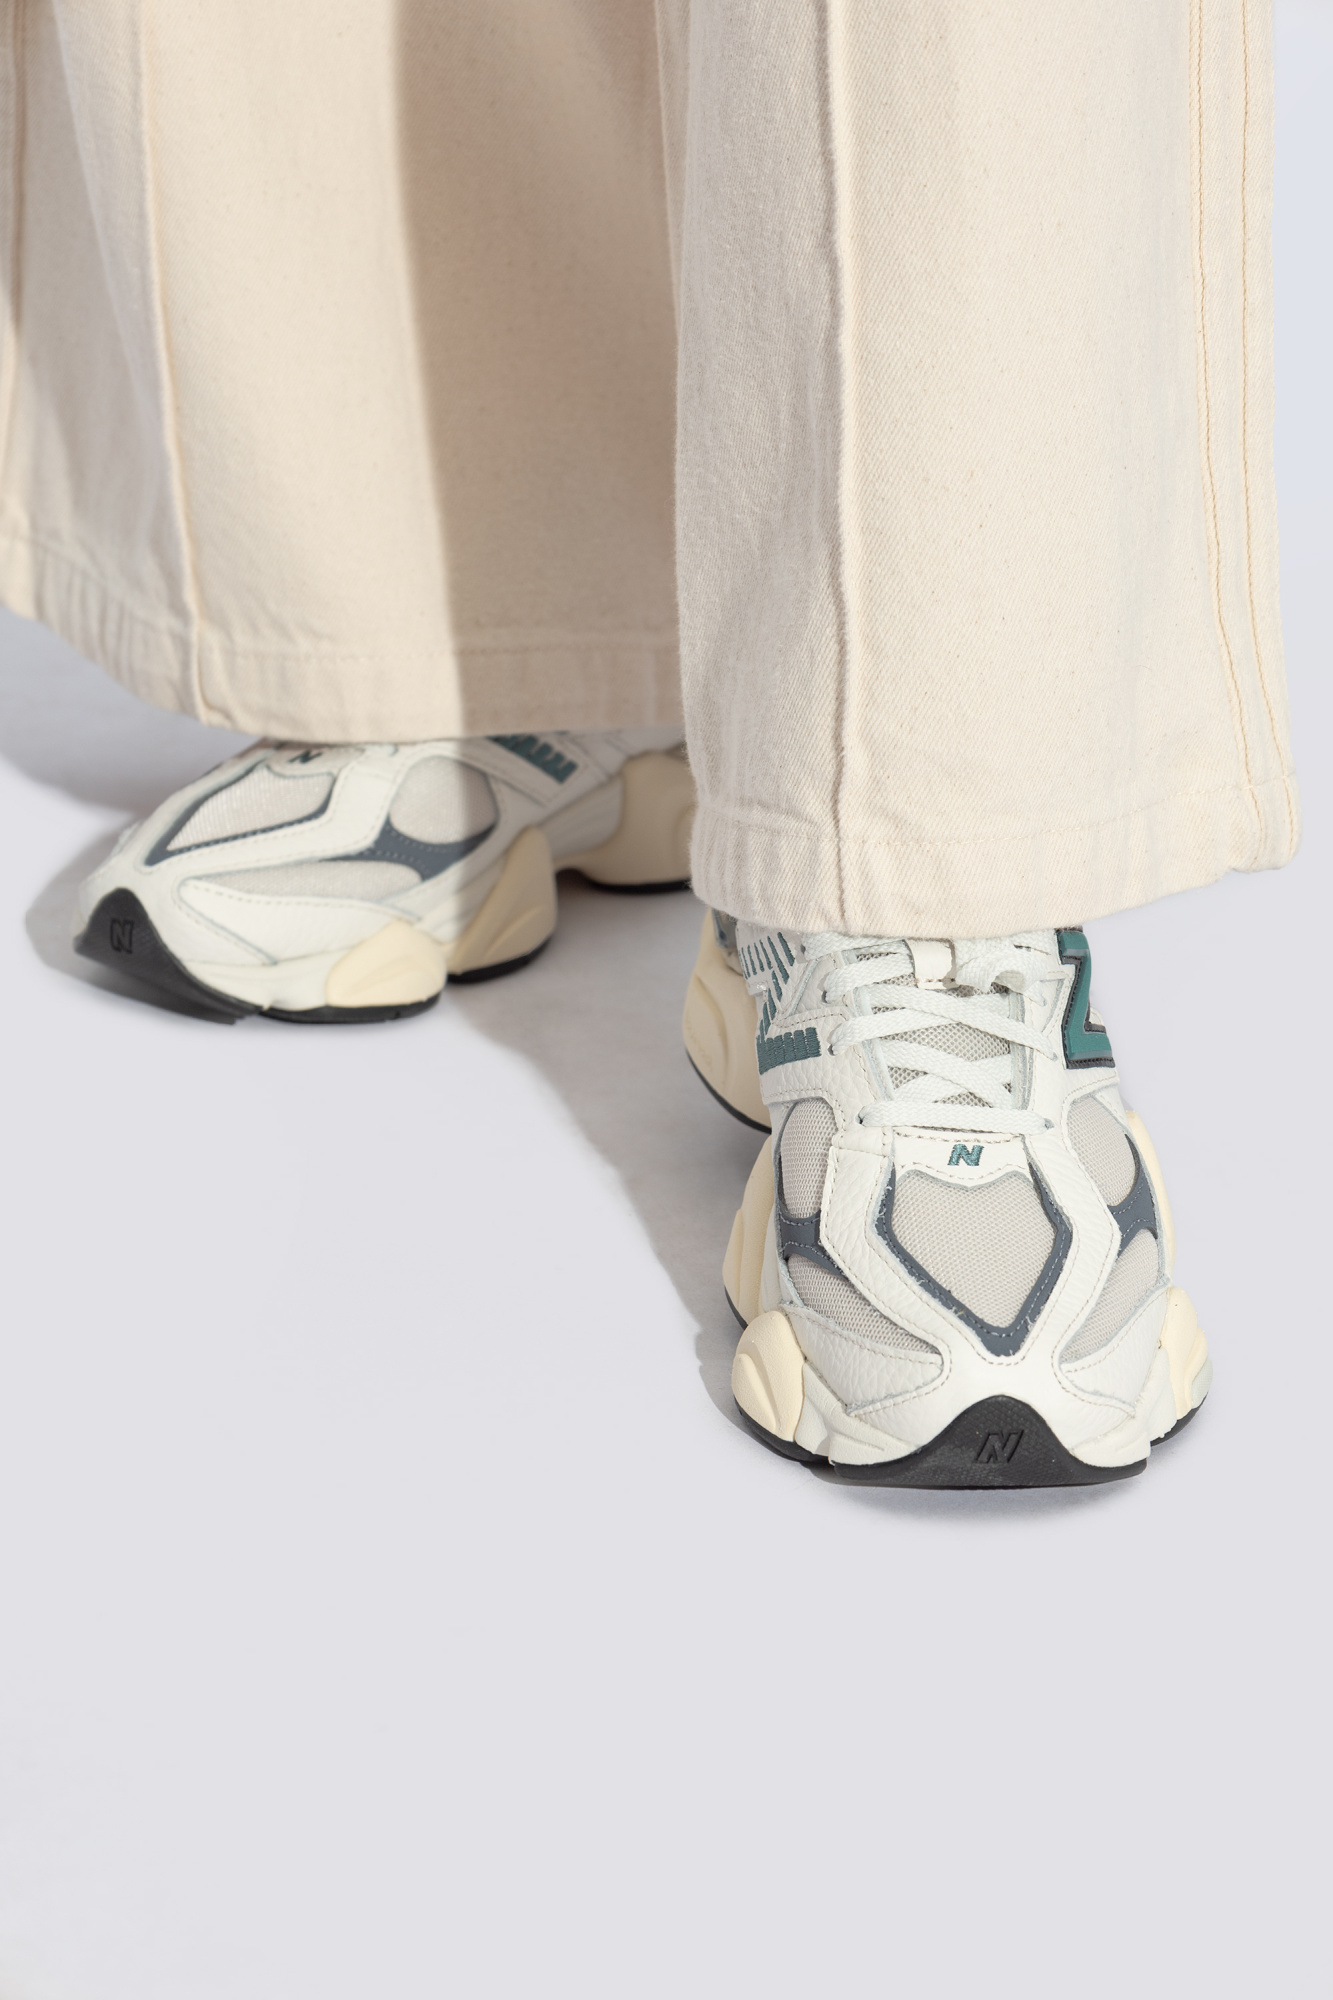 New Balance Scroll down below for our favorite sandals and heels this summer season;